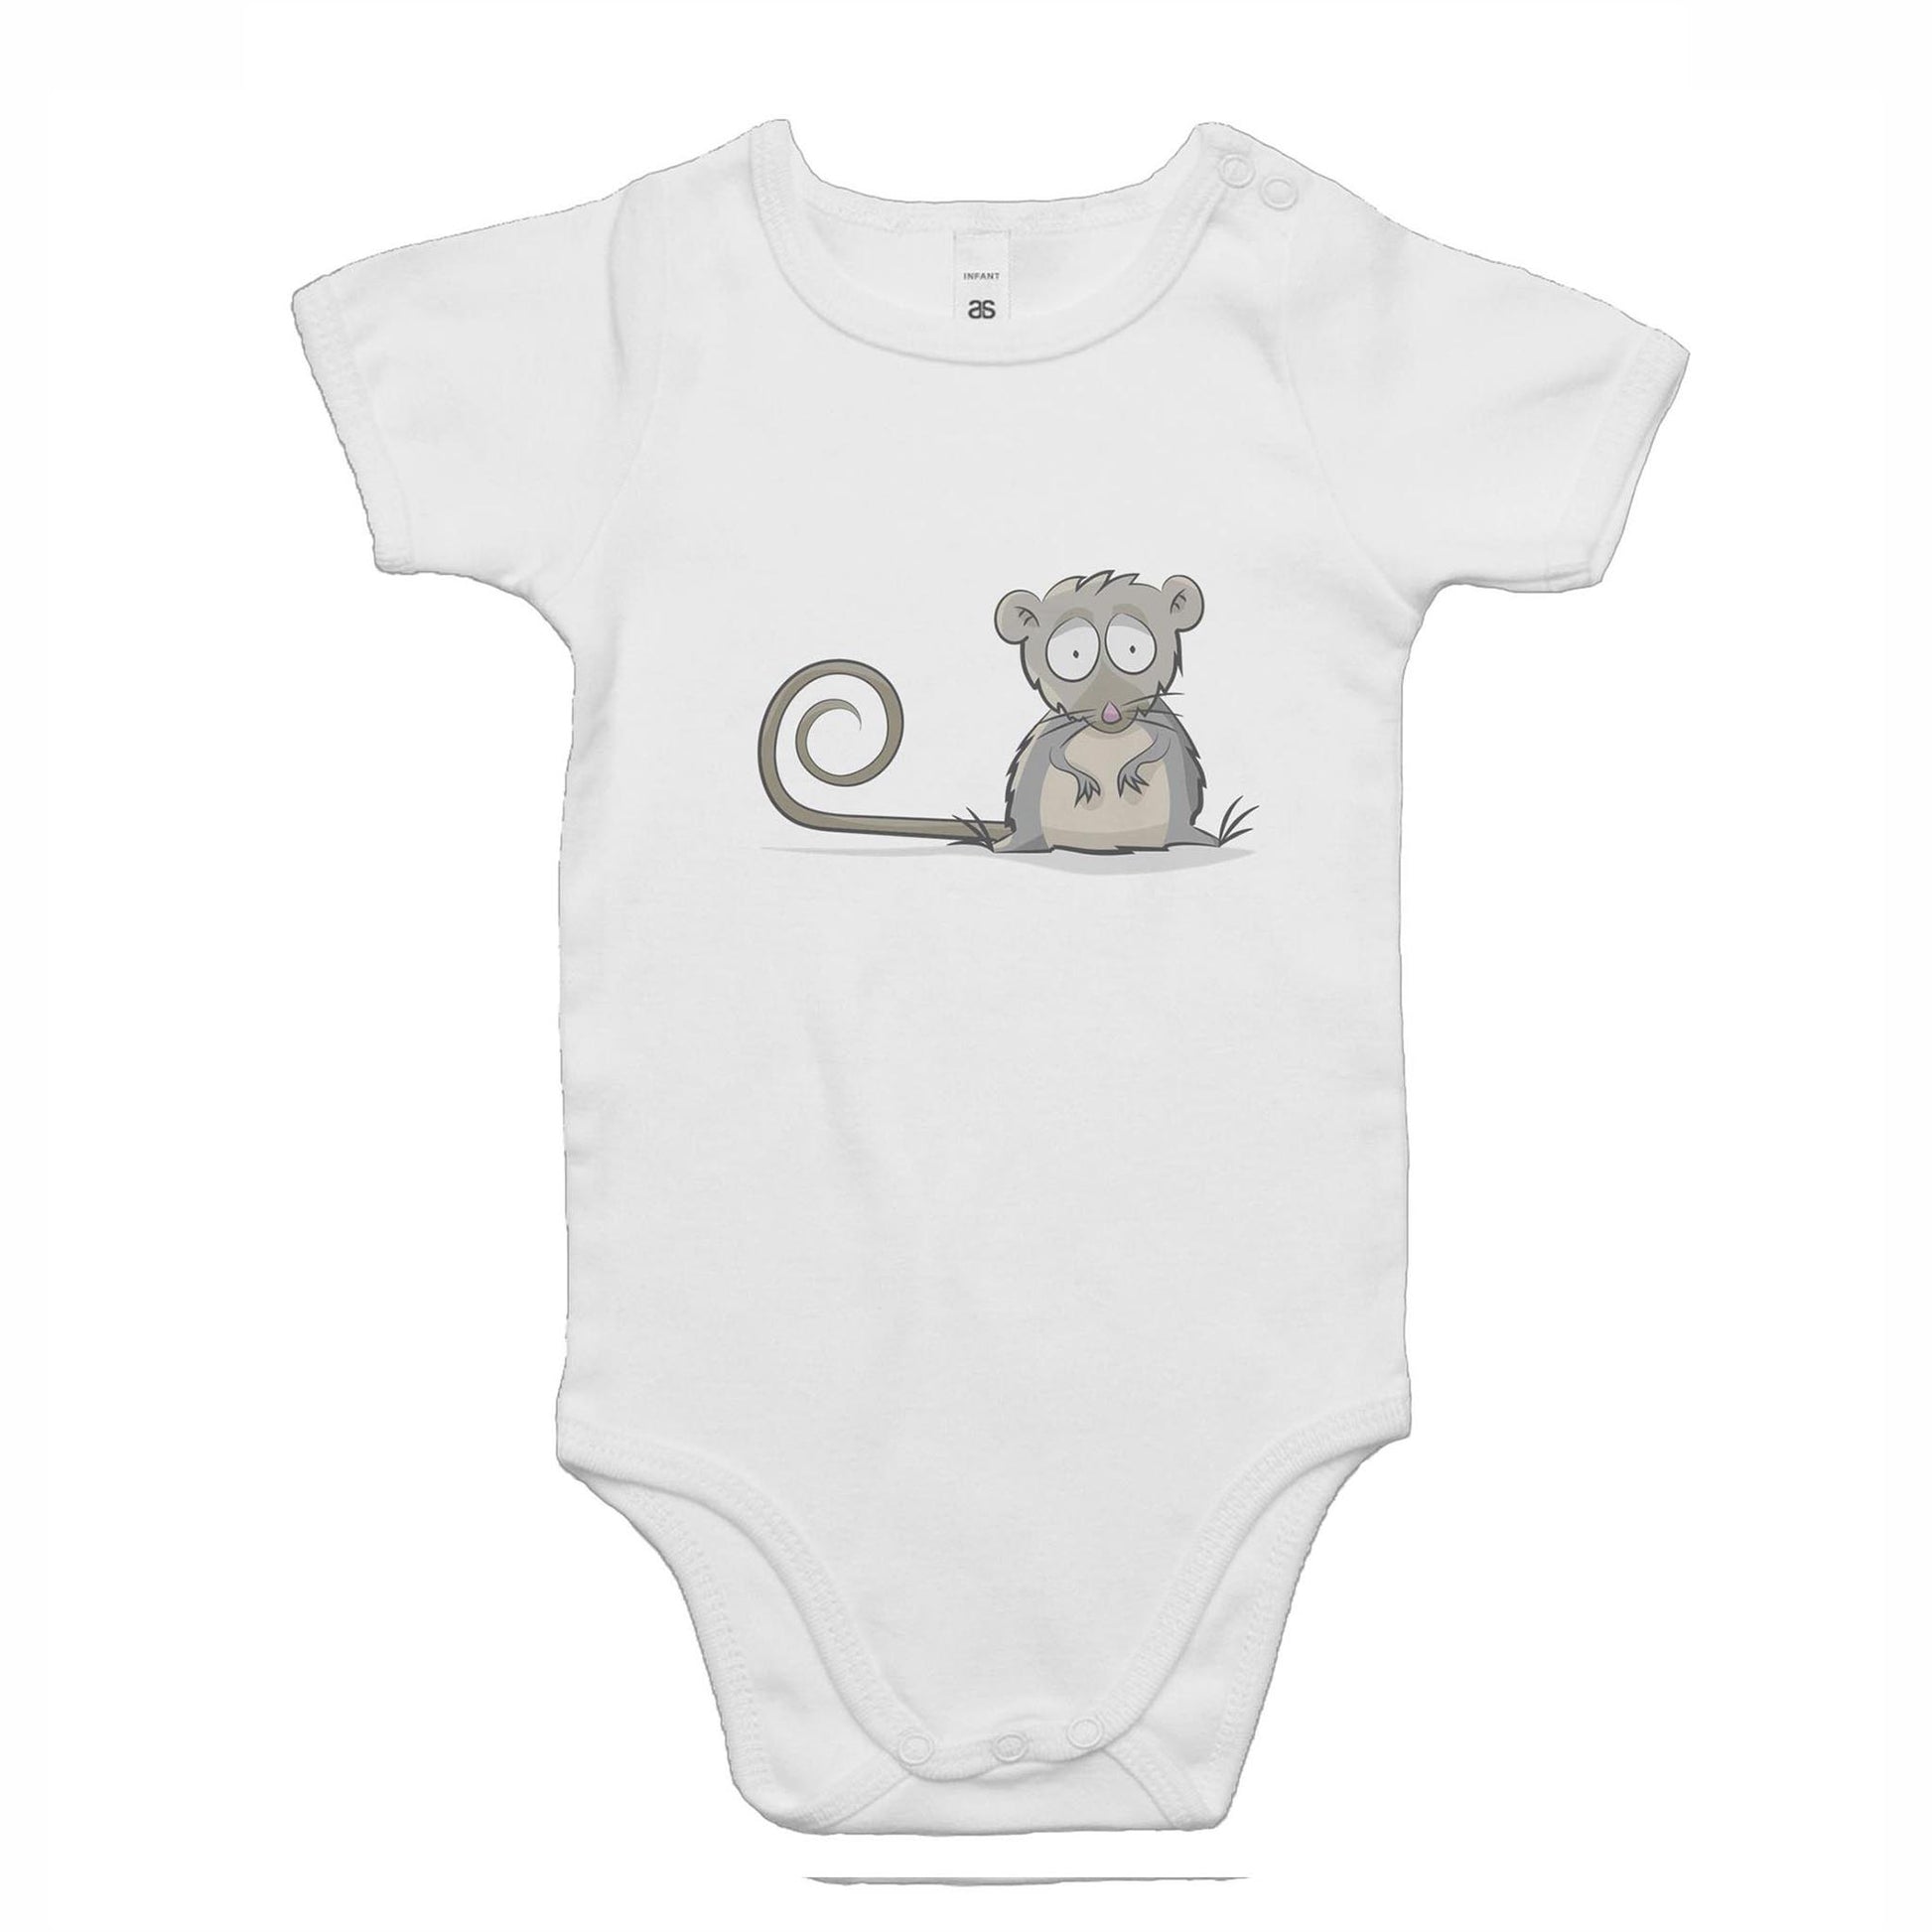 A white baby romper suit with a printed seated mountain pygmy possum toon